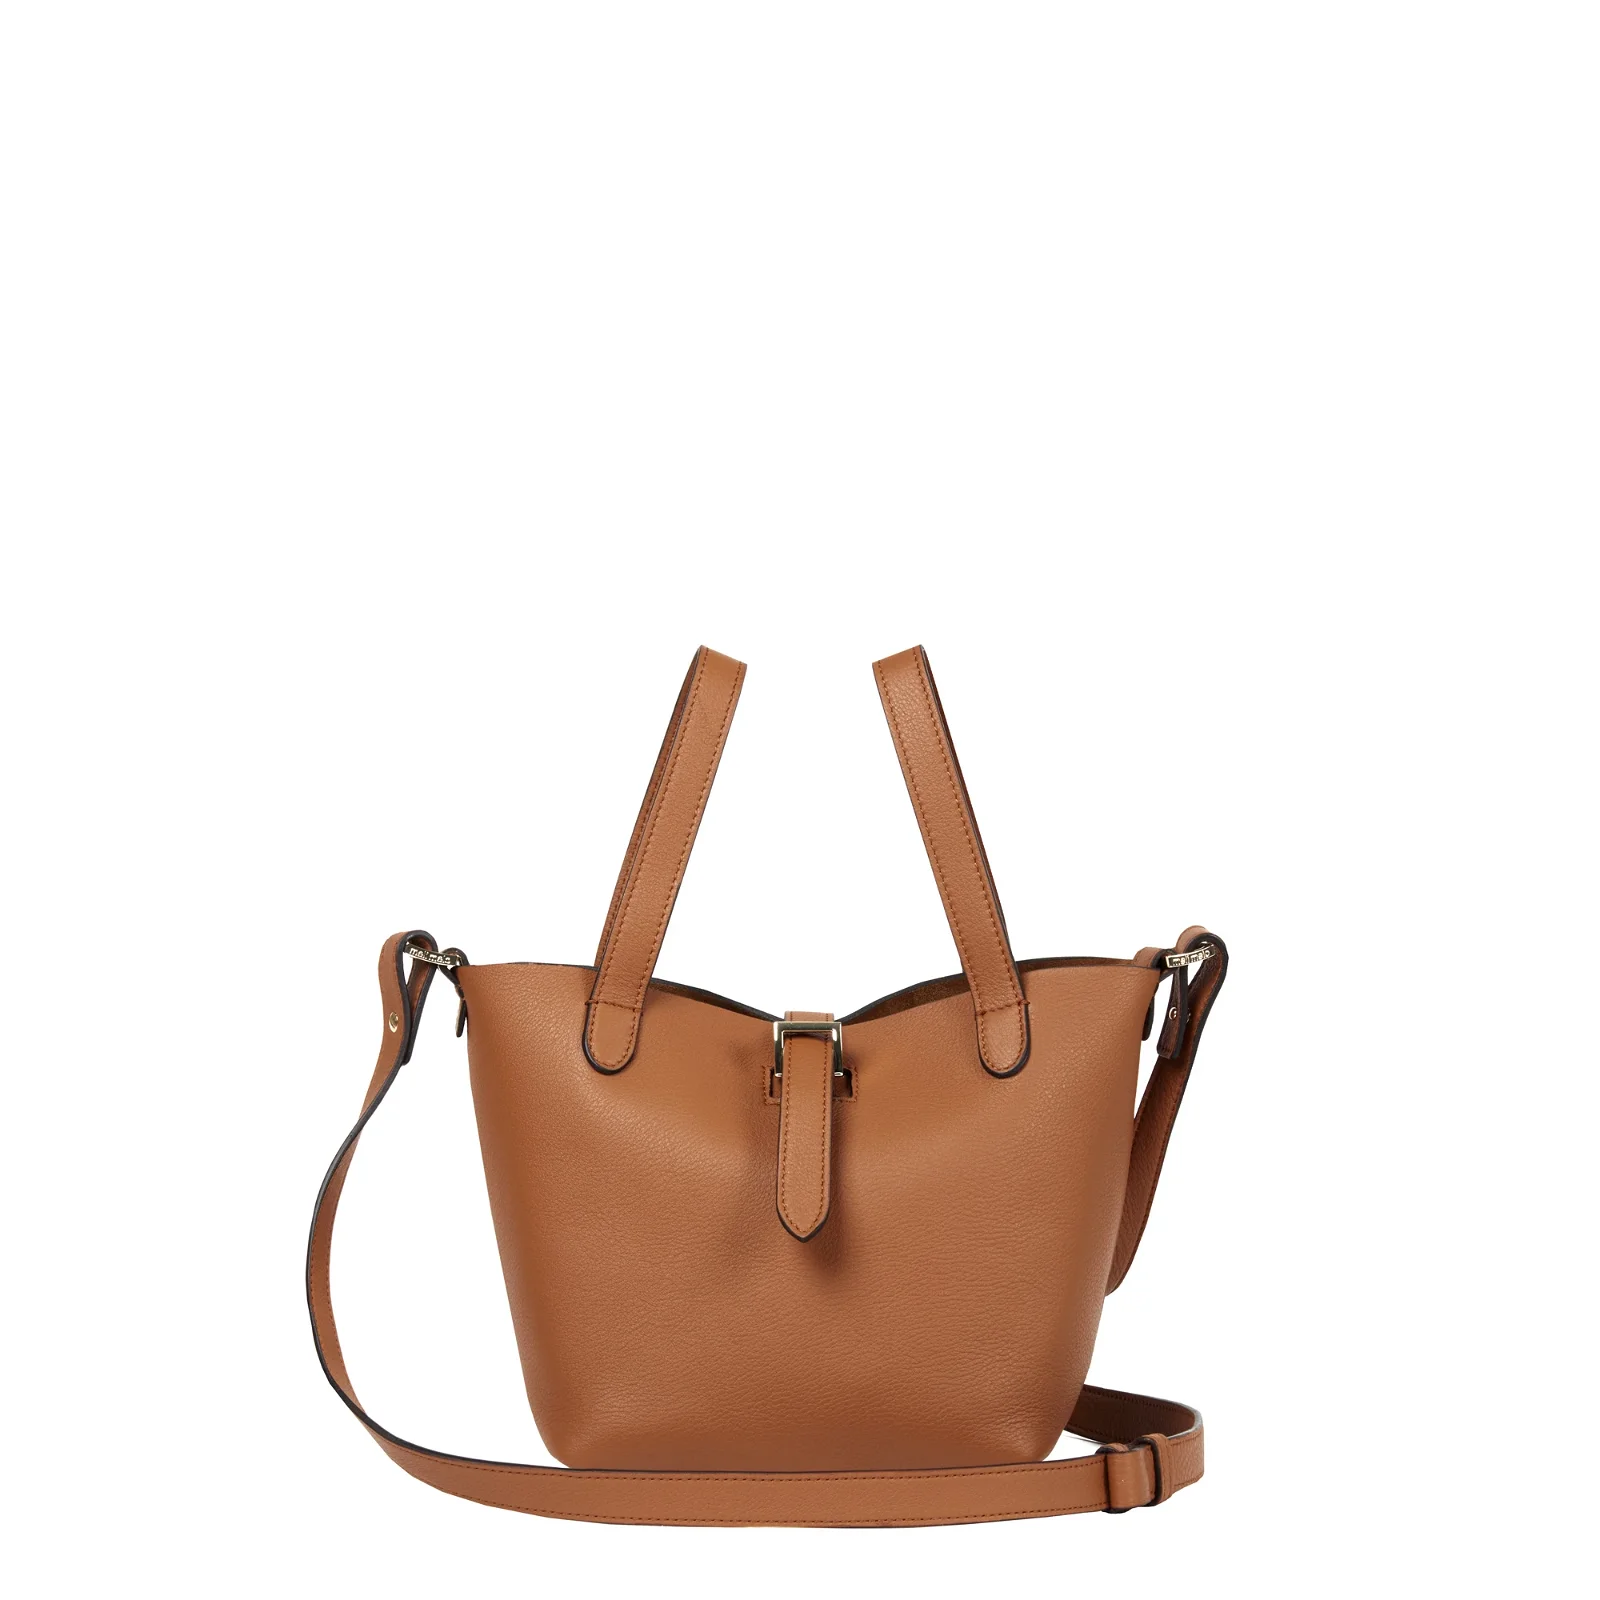 Thela Mini Tan and Green with Zip Closure Cross Body Bag for Women